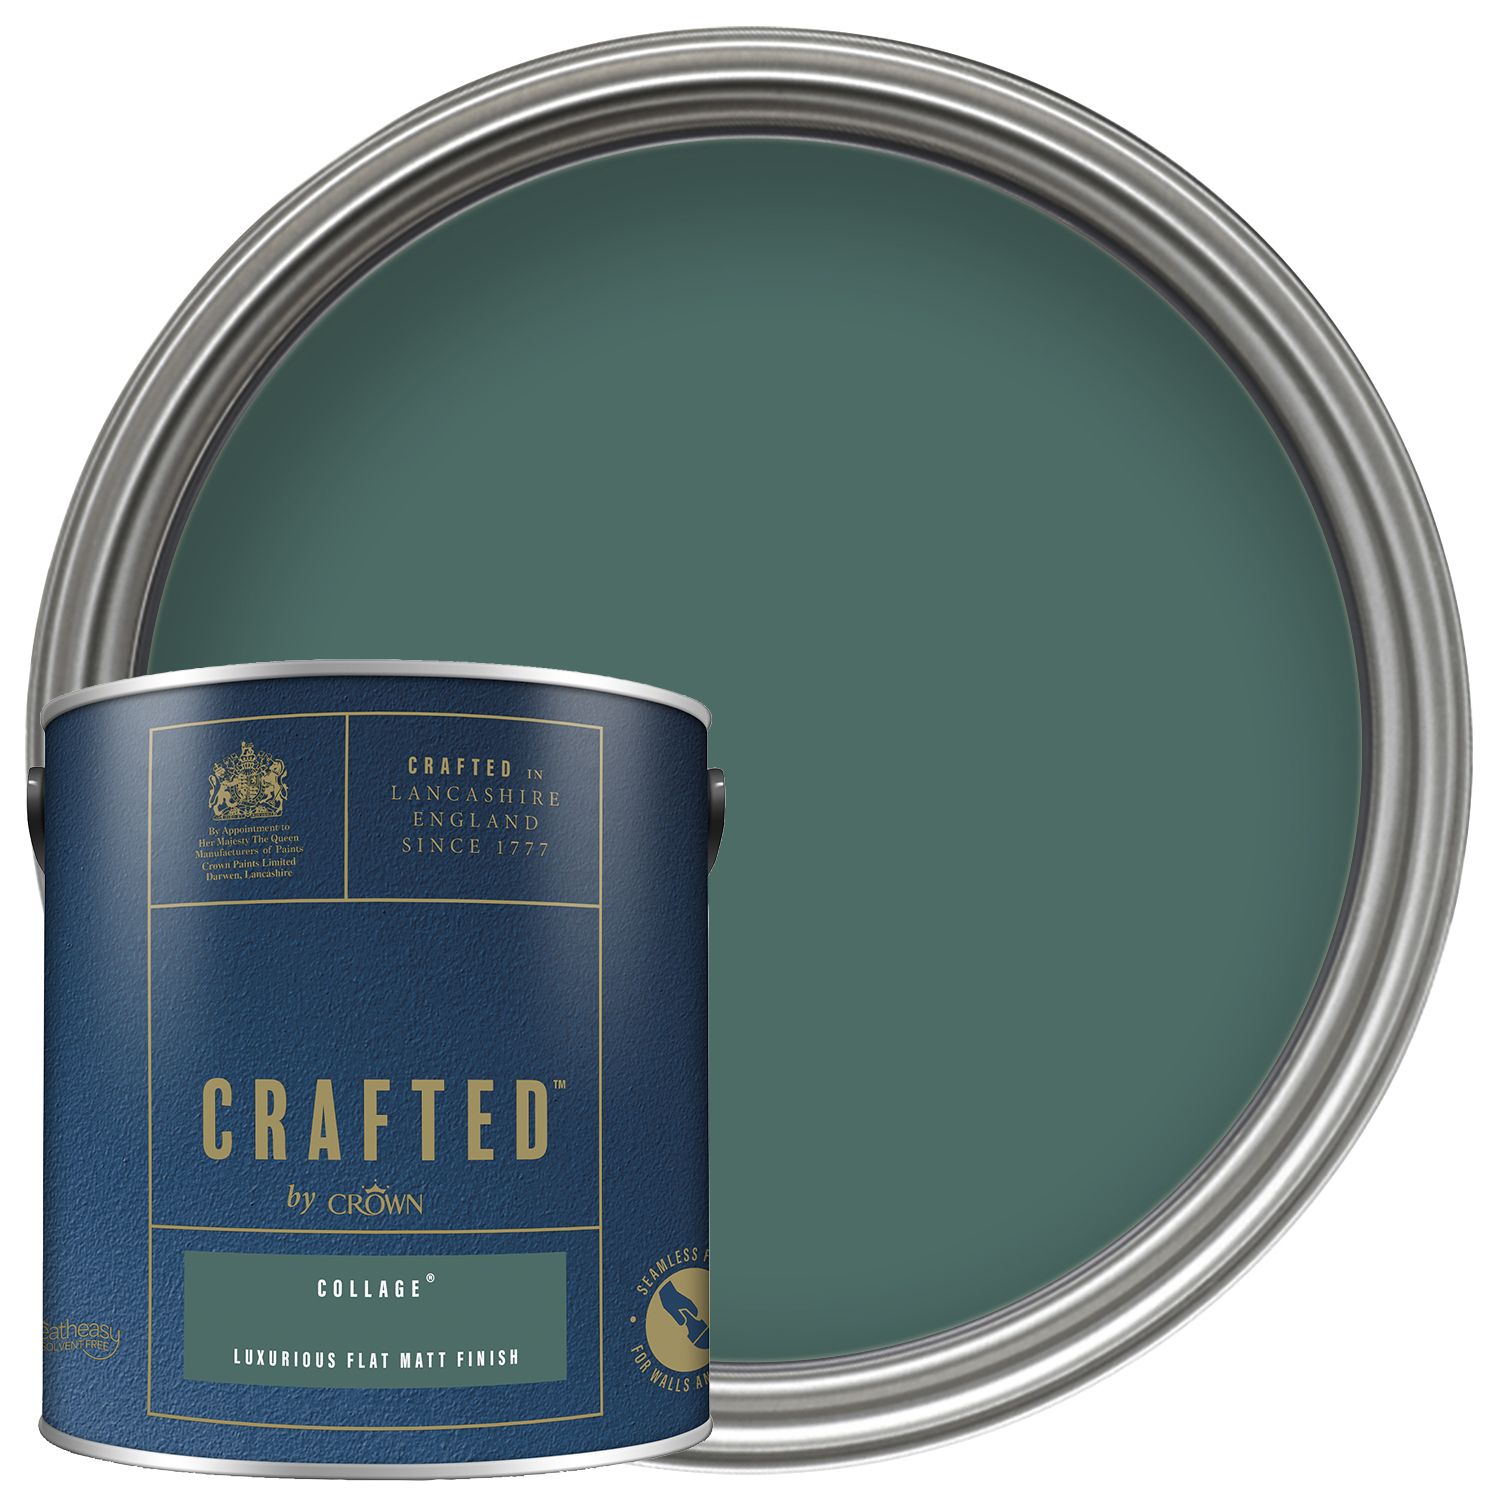 Image of CRAFTED™ by Crown Flat Matt Emulsion Interior Paint - Collage™ - 2.5L